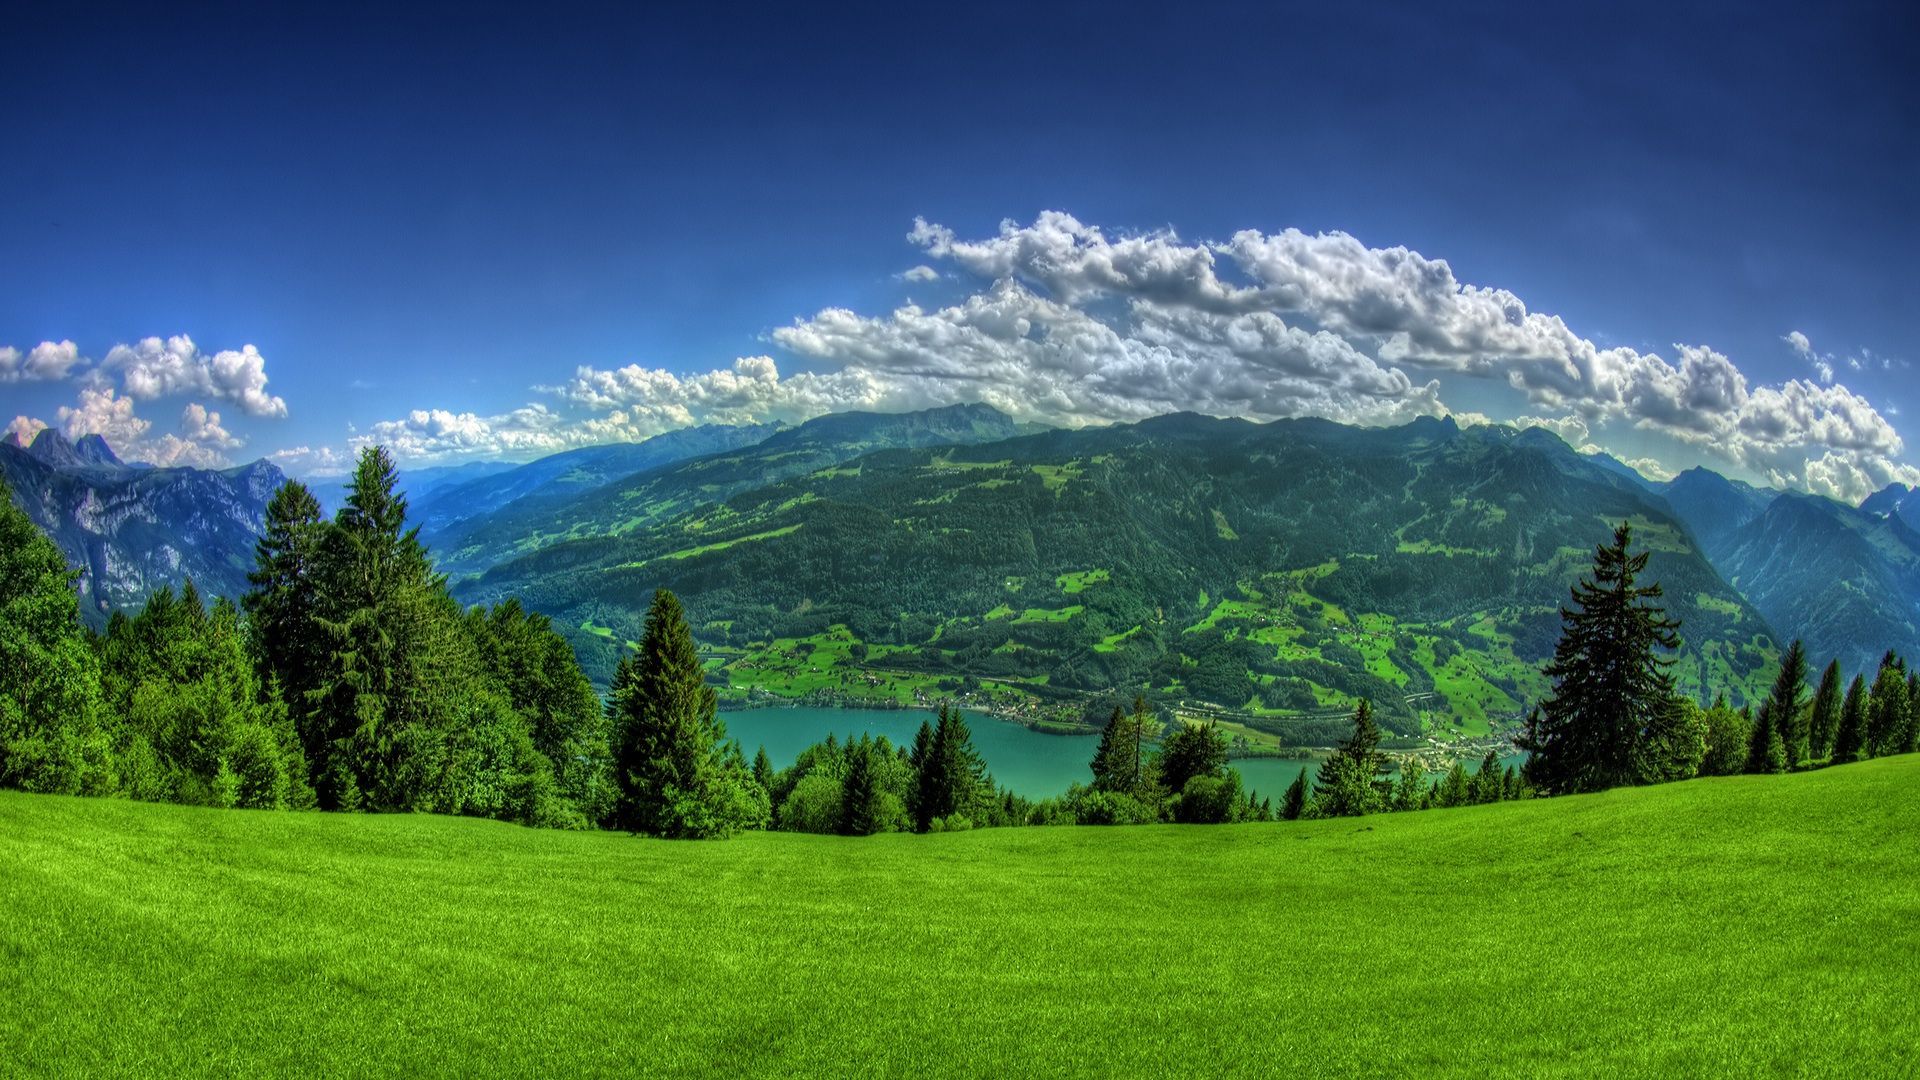 Green Pasture Moutains And Lake Landscape HD Wallpaper. Prachtige